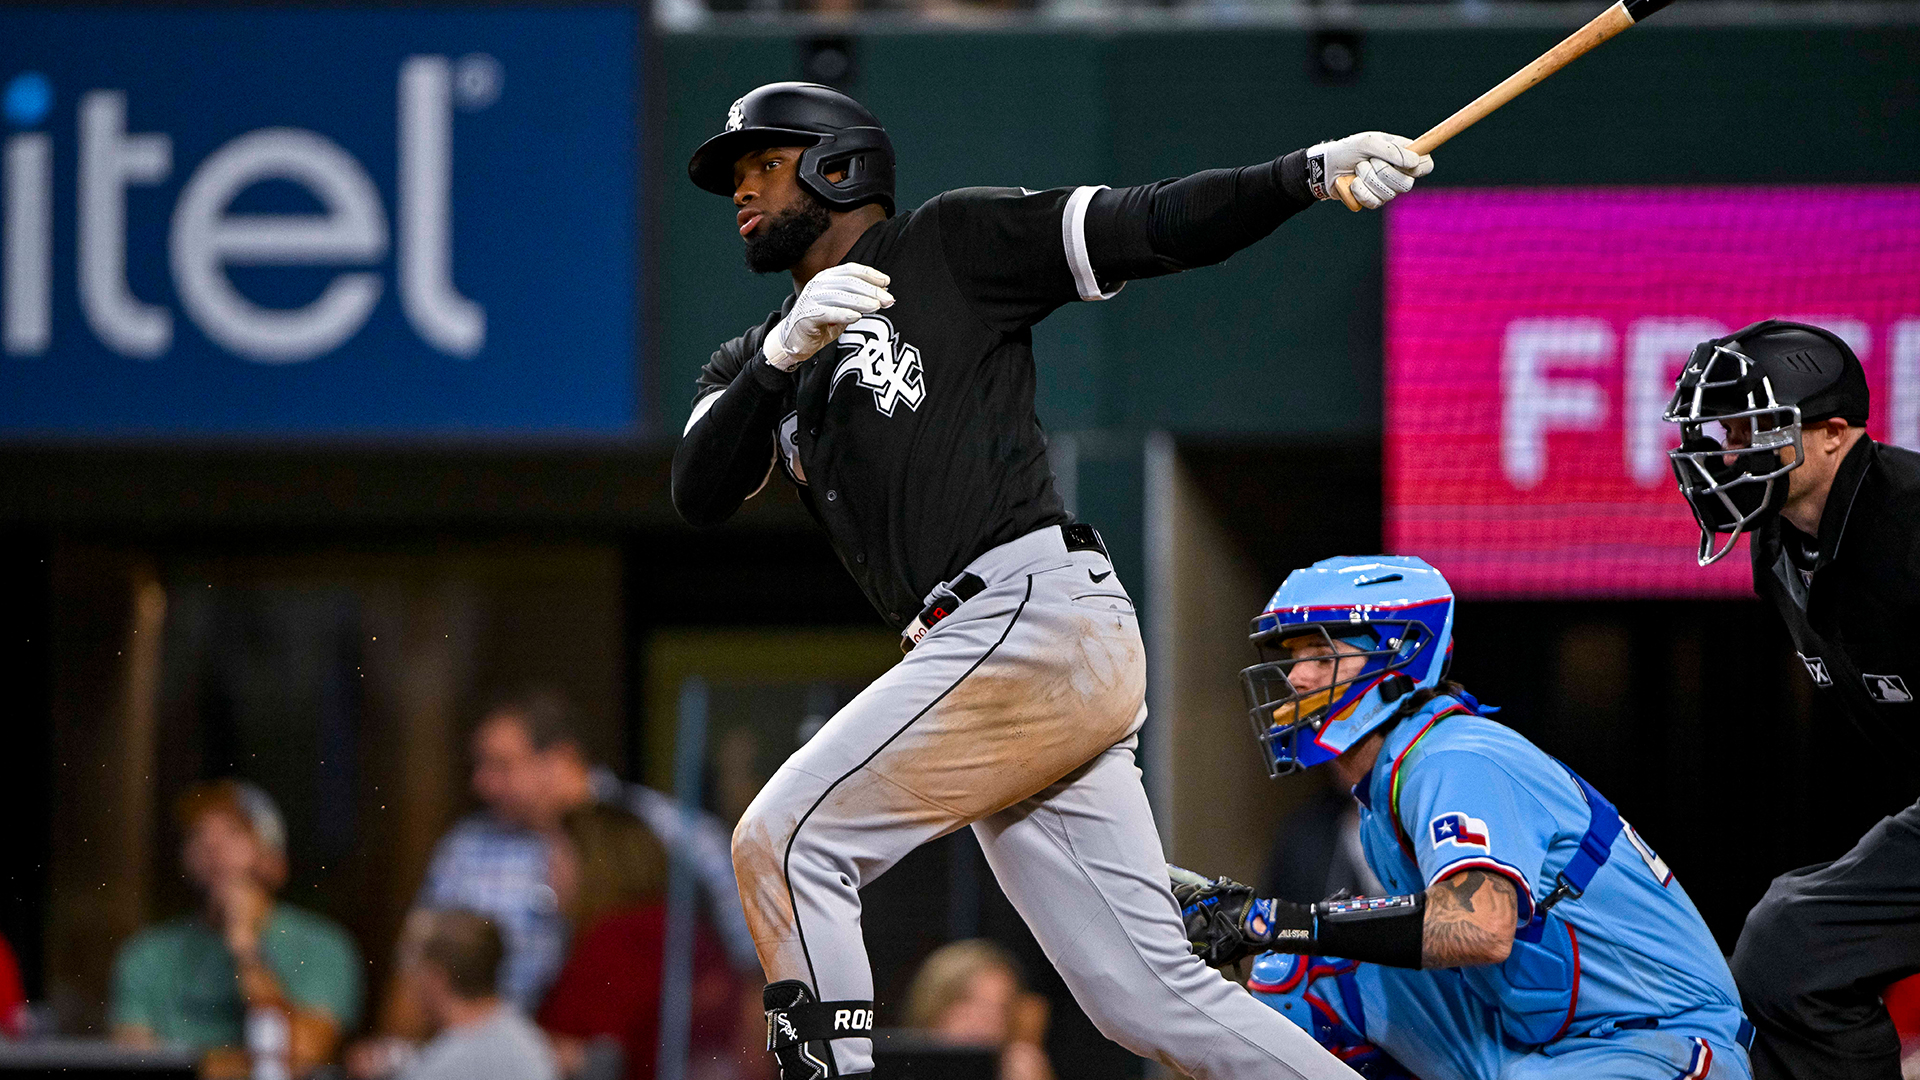 White Sox CF Luis Robert Jr. still looking for healthy year